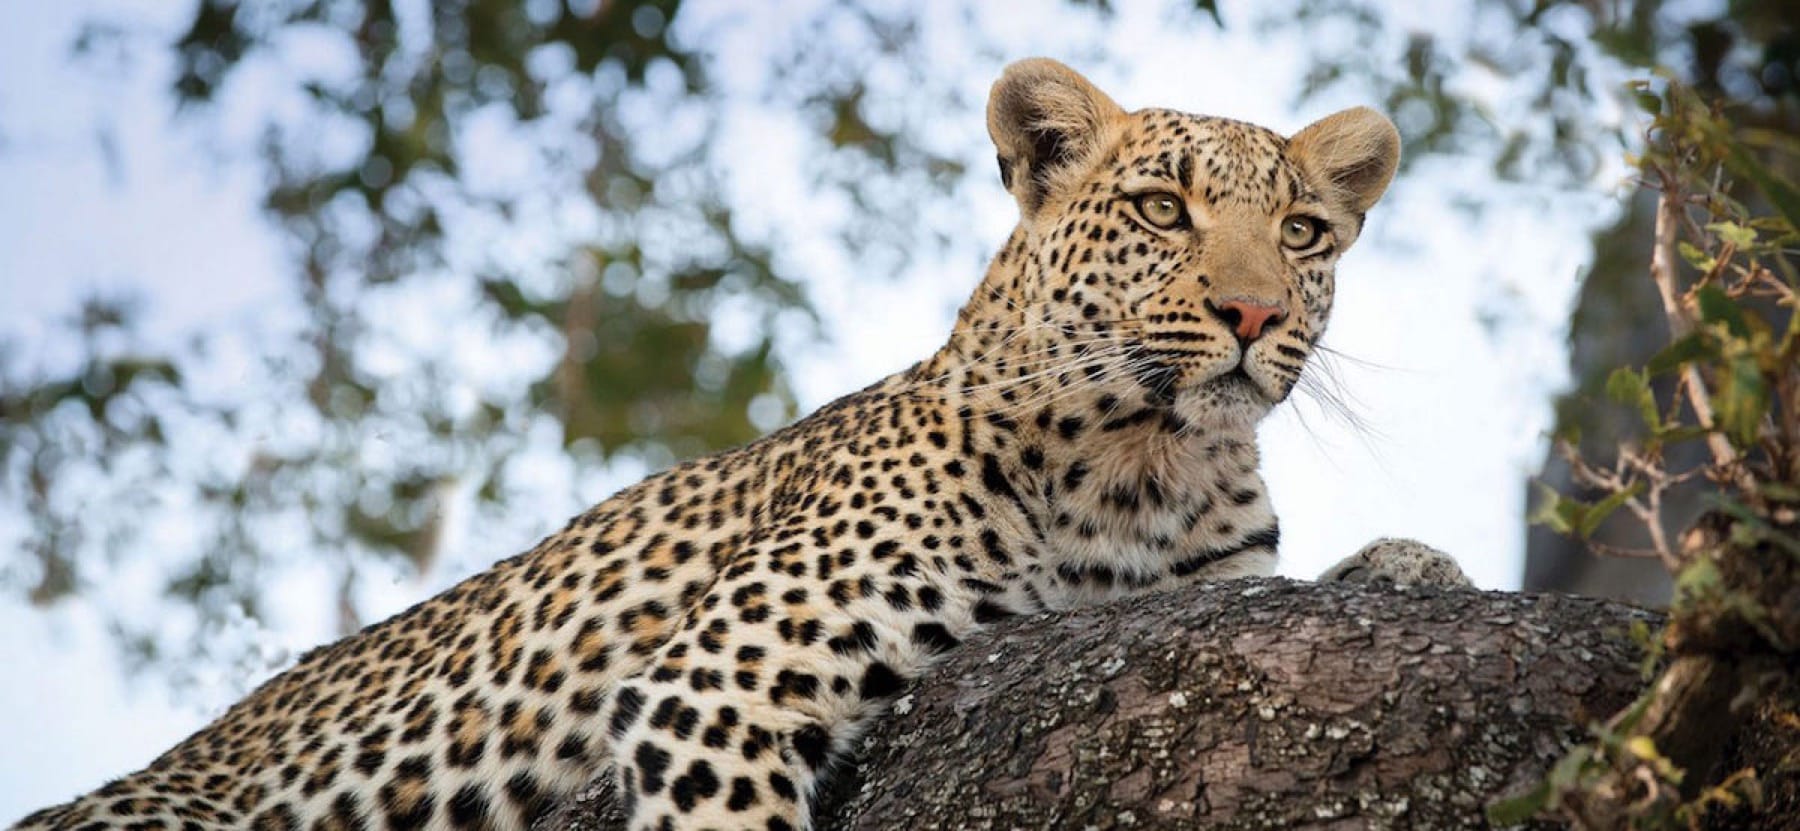 Moremi Gamme Reserve is home to amazing wildlife